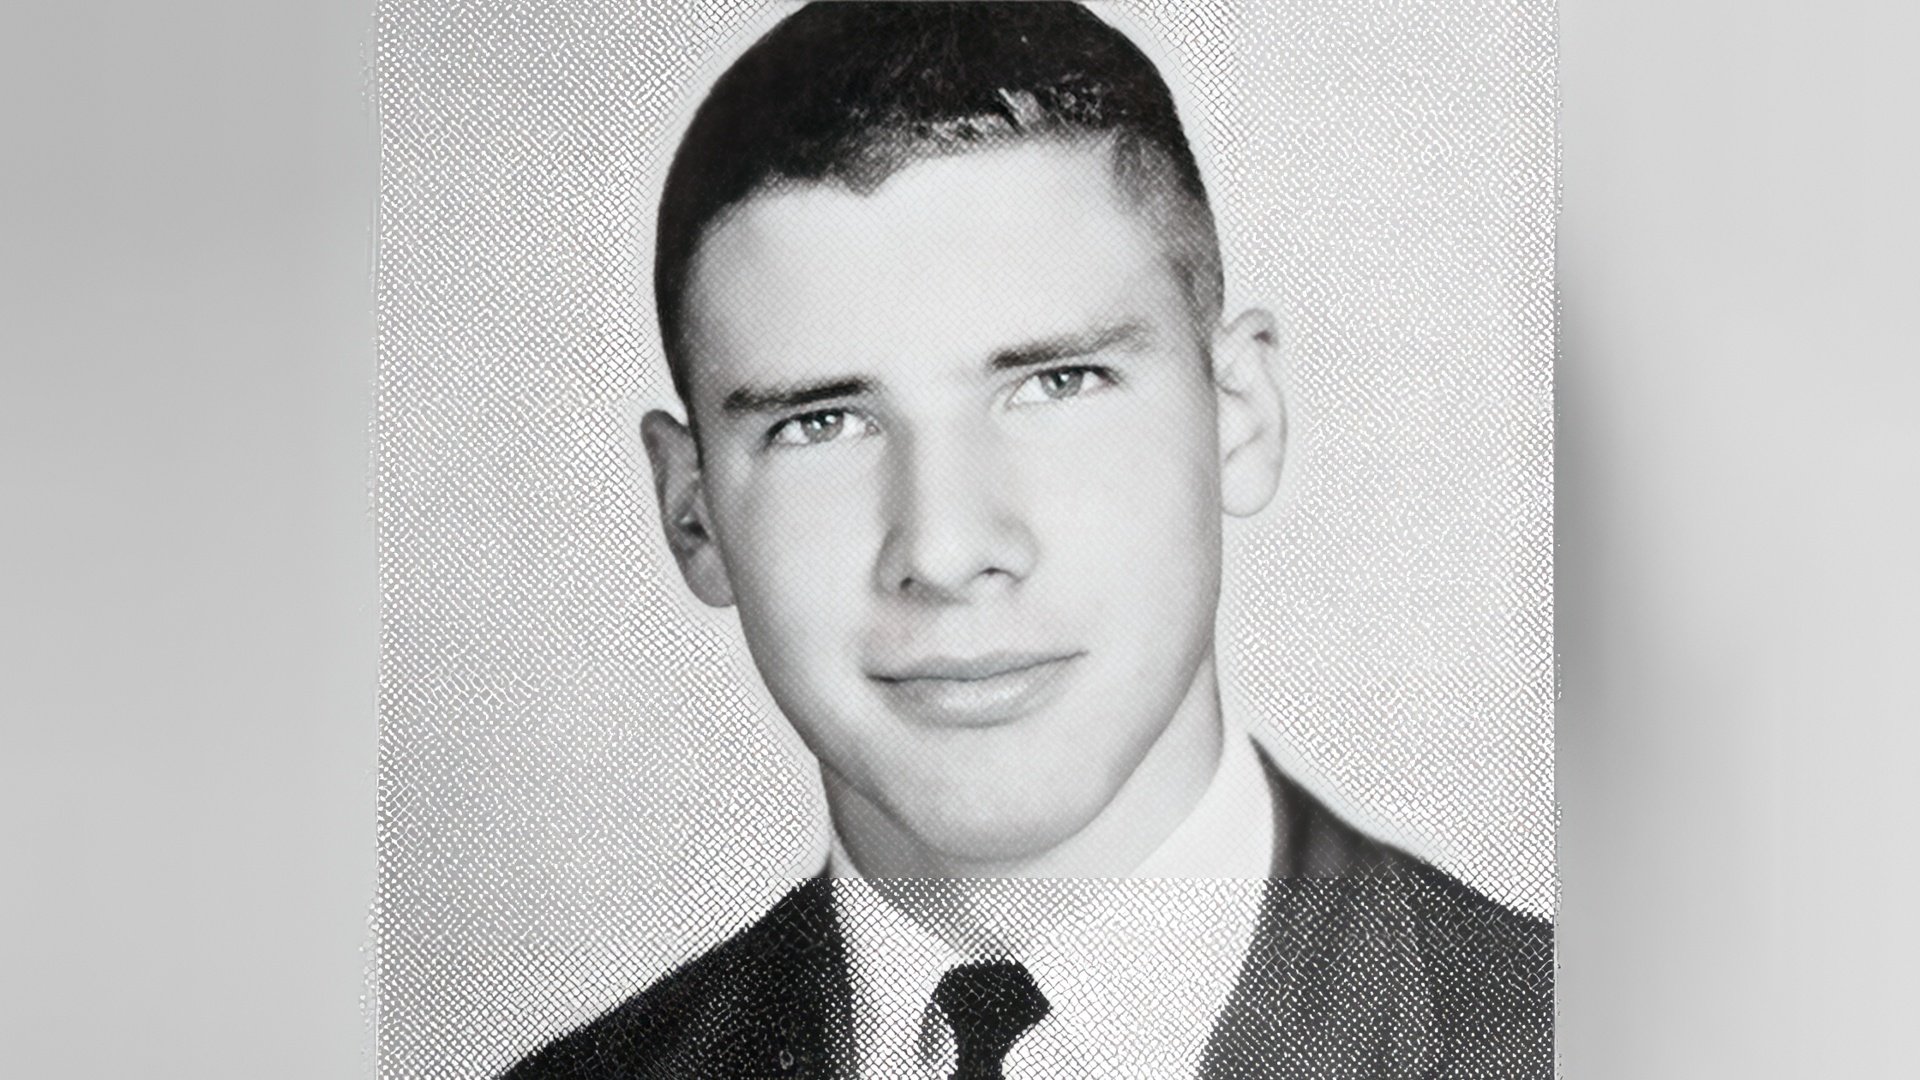 Harrison Ford overcame shyness but didn’t graduate from college